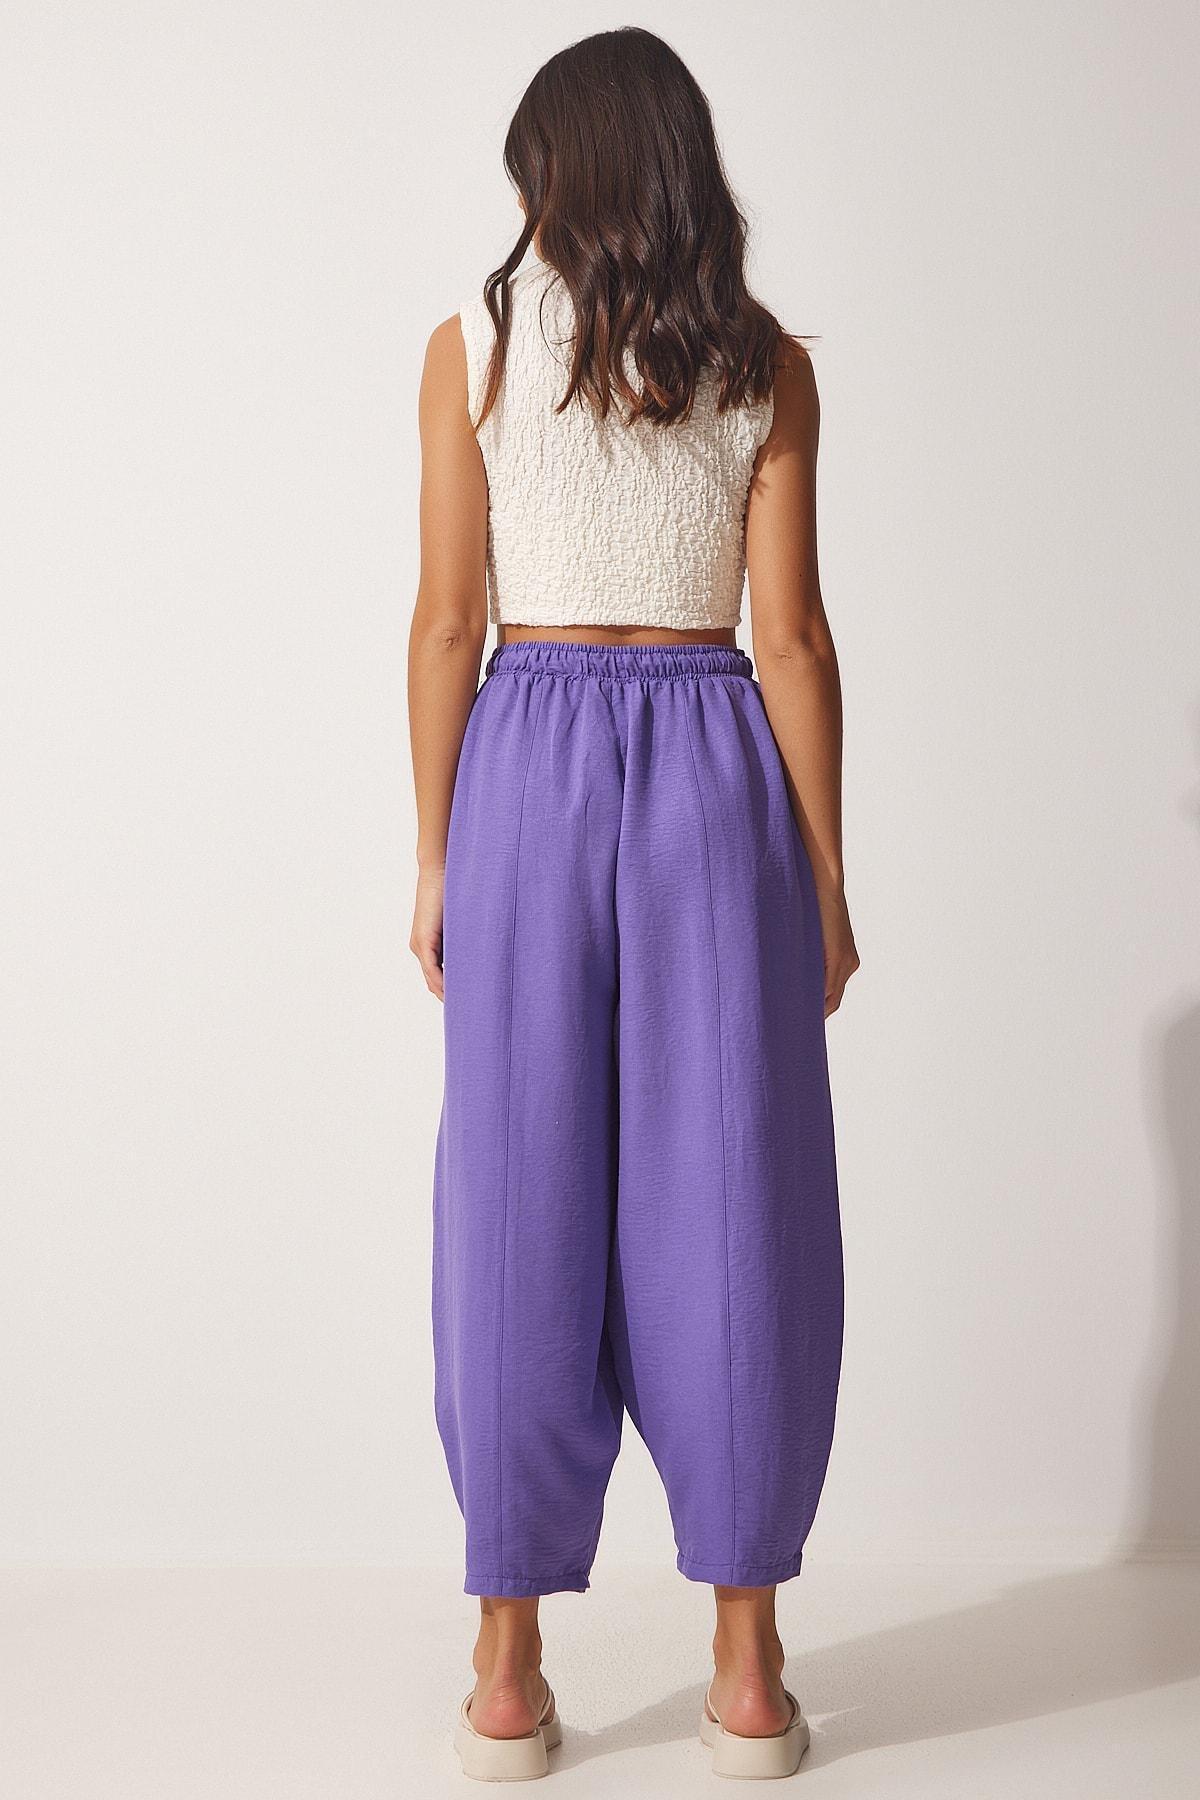 Happiness Istanbul - Purple Carrot Pants